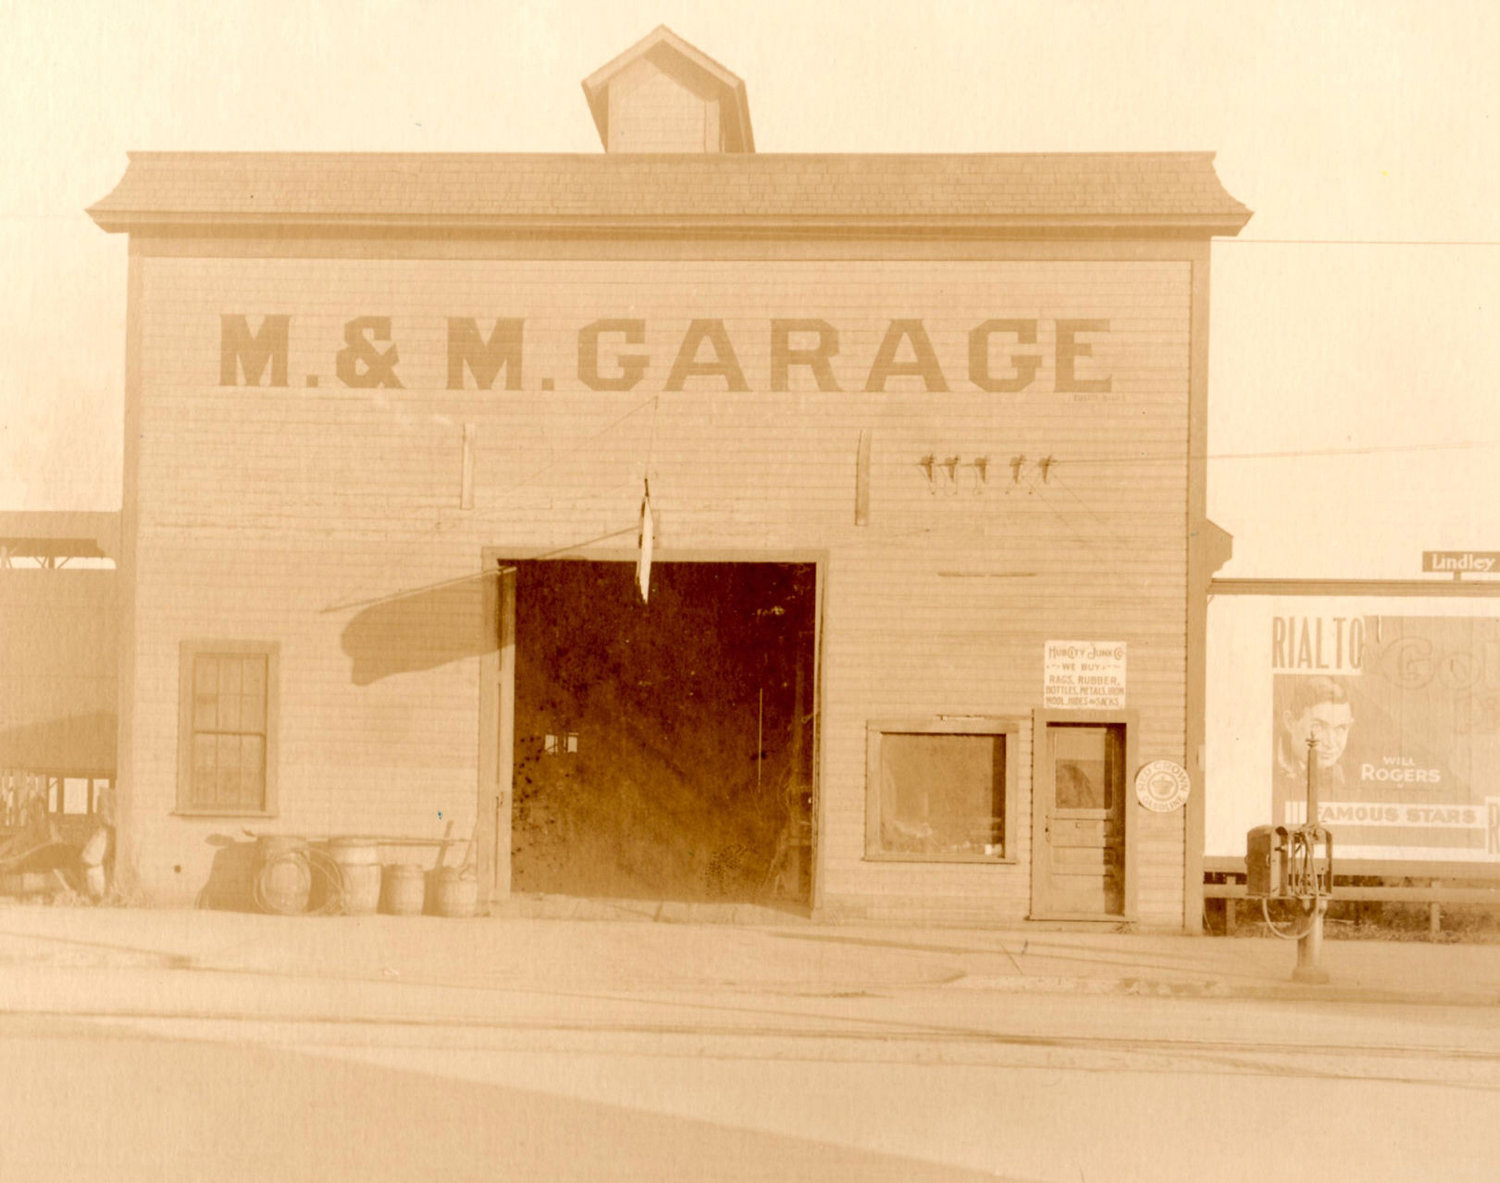 This photo of the M. &amp; M. Garage was used during the trials following the Armistice Day Tragedy of 1919 and is part of a larger collection of artifacts from the event to be used as the 100th anniversary is marked.